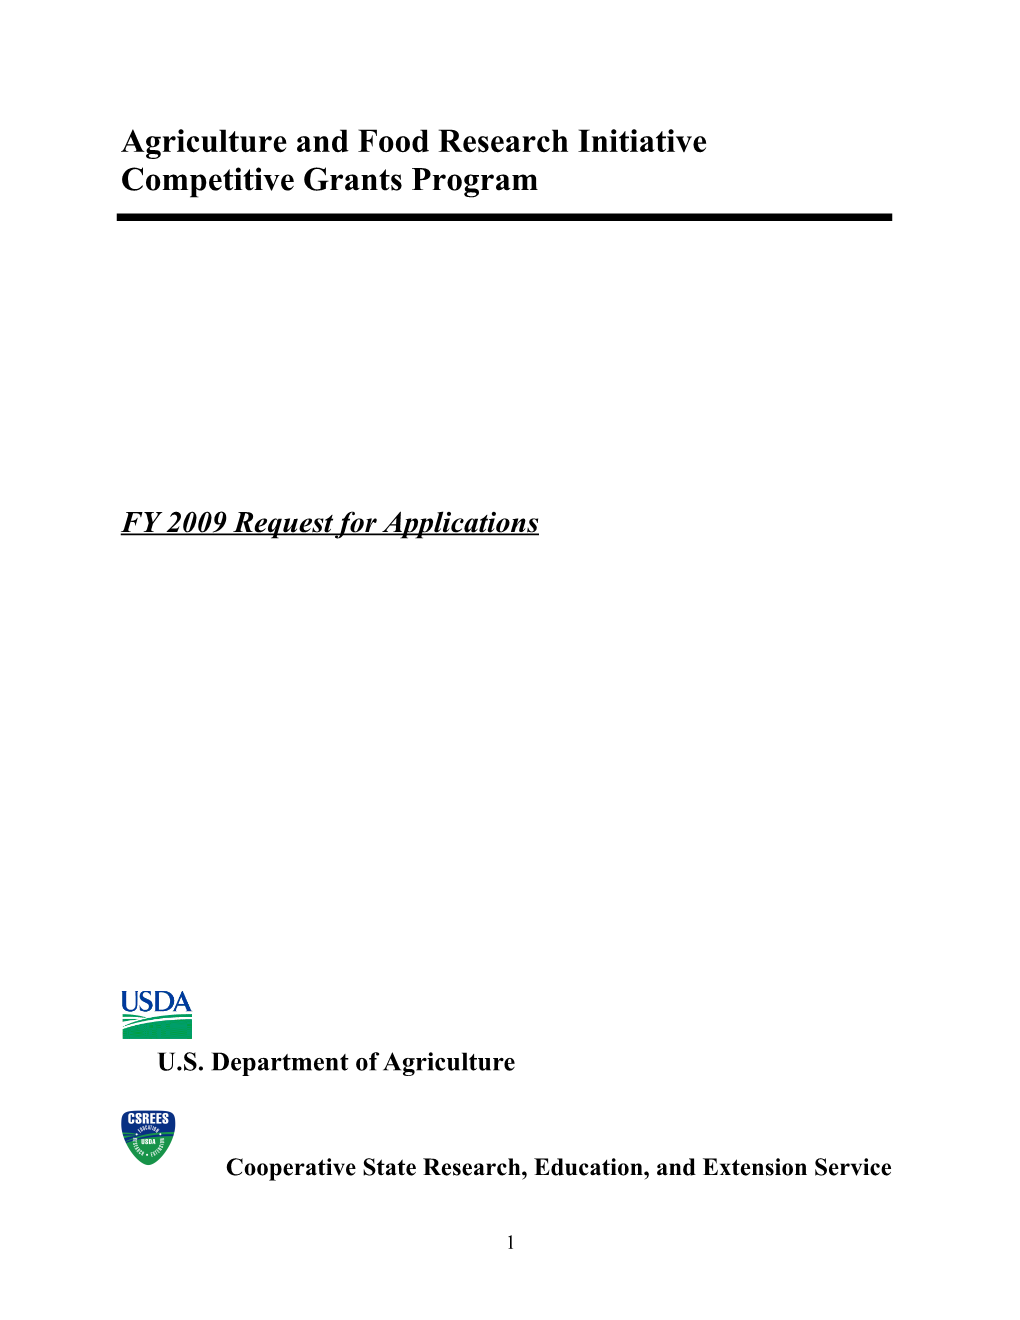 [DOC] National Research Initiative Competitive Grants Program FY 2008 Request For Applications